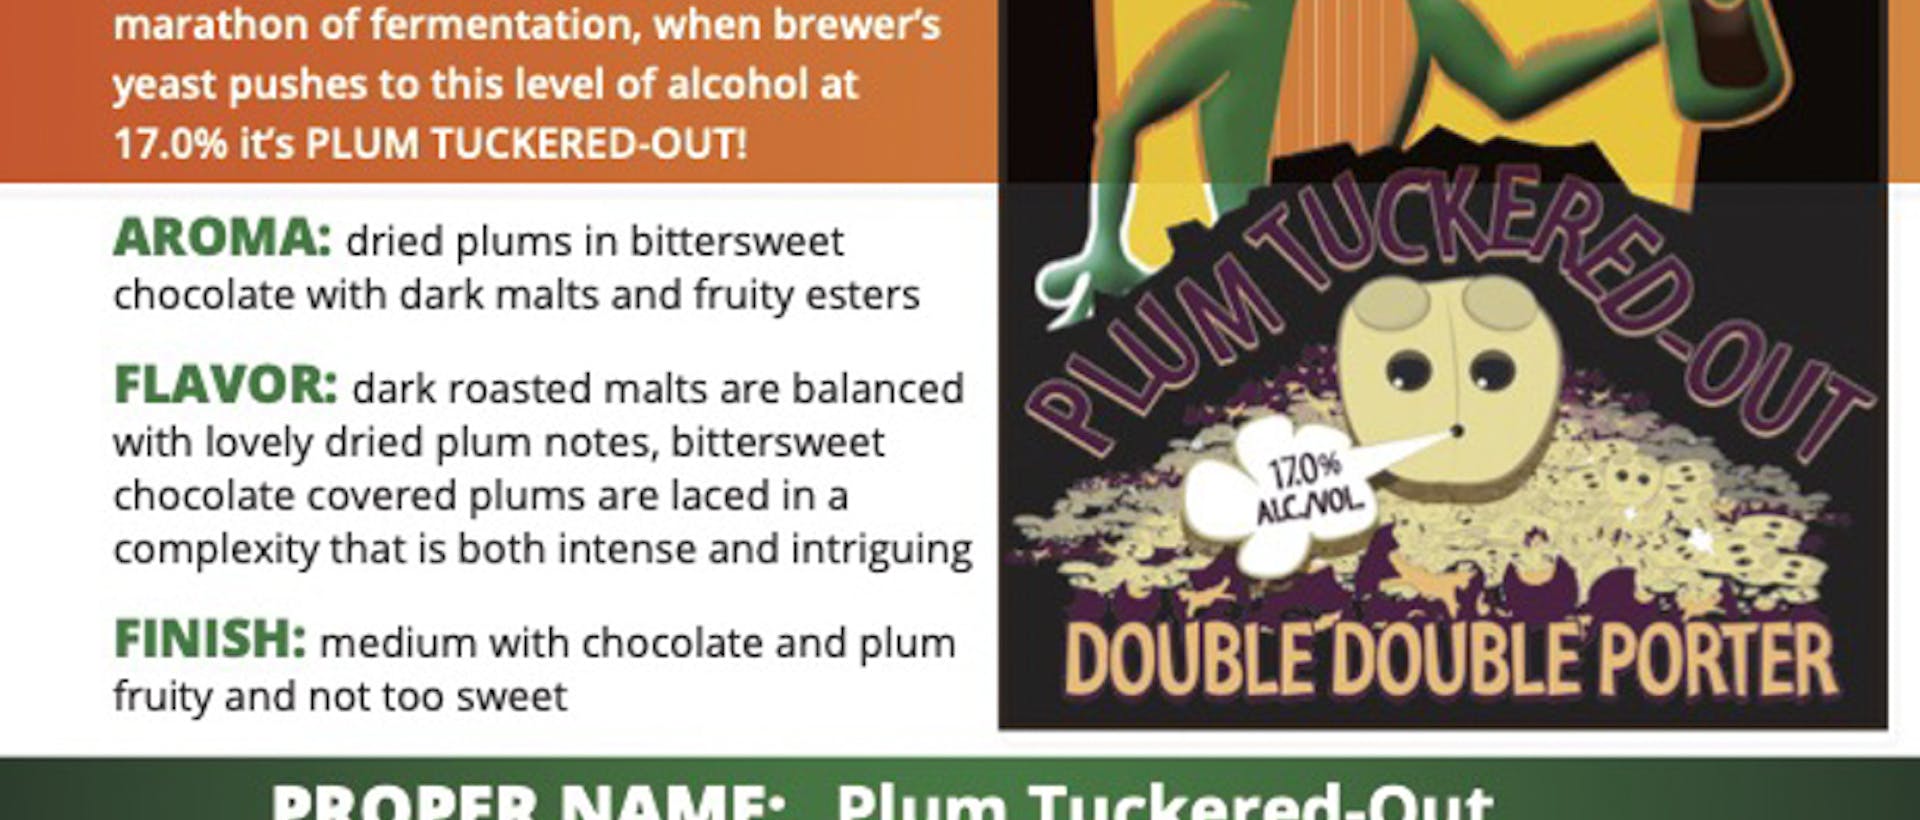 HF_Sell Sheet - High Gravity Series - Plum Tuckered-Out Double Double Porter (updated 01-13-2022)